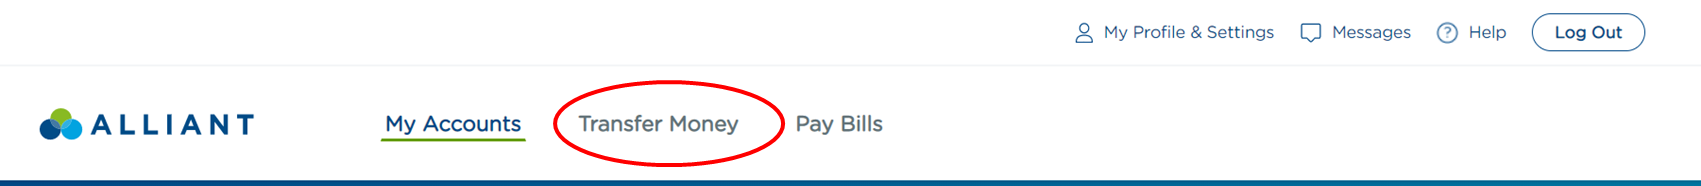 online banking menu with Transfer Money link circled